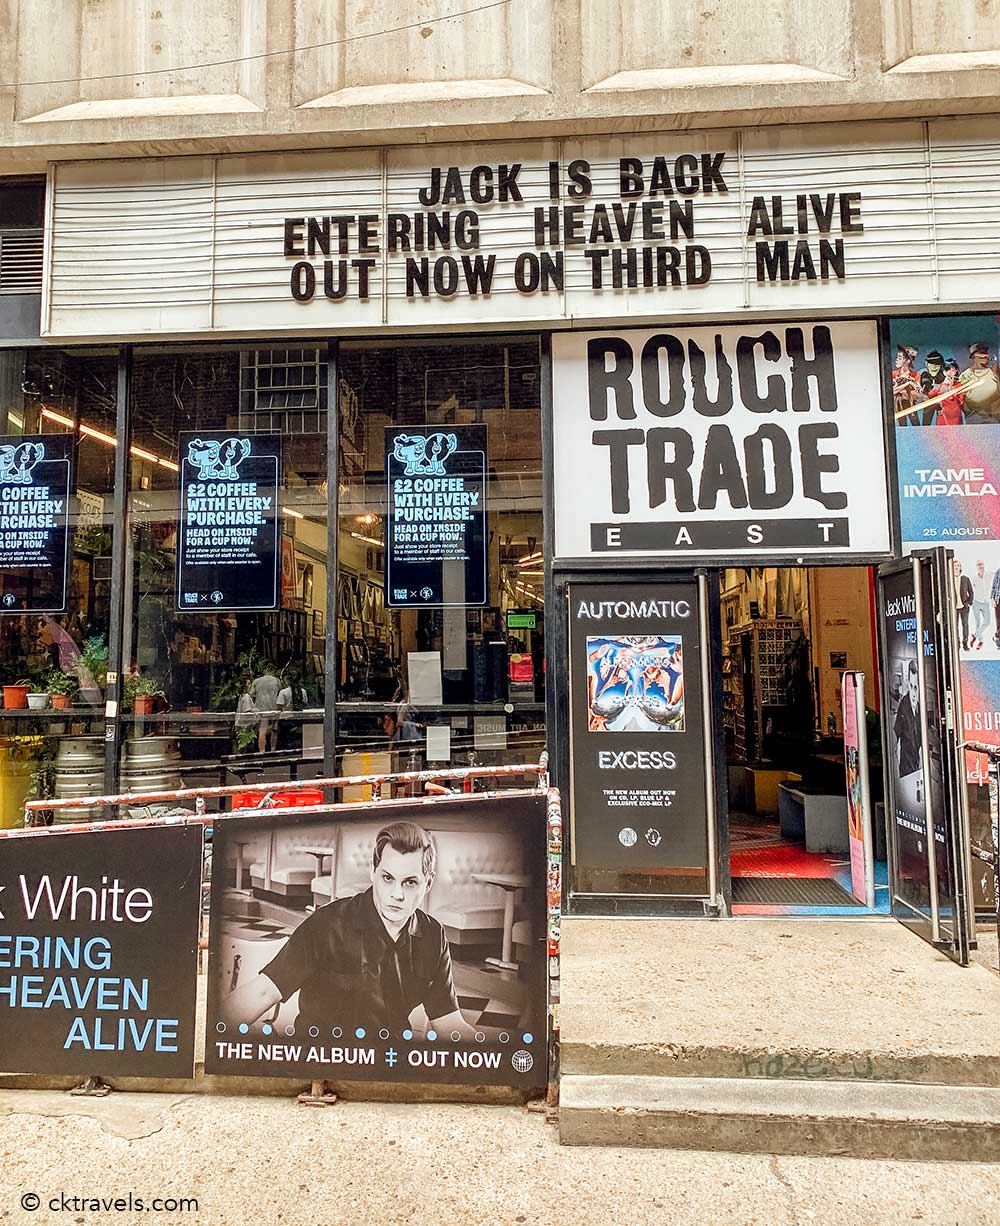 Rough Trade East near Liverpool Street Station